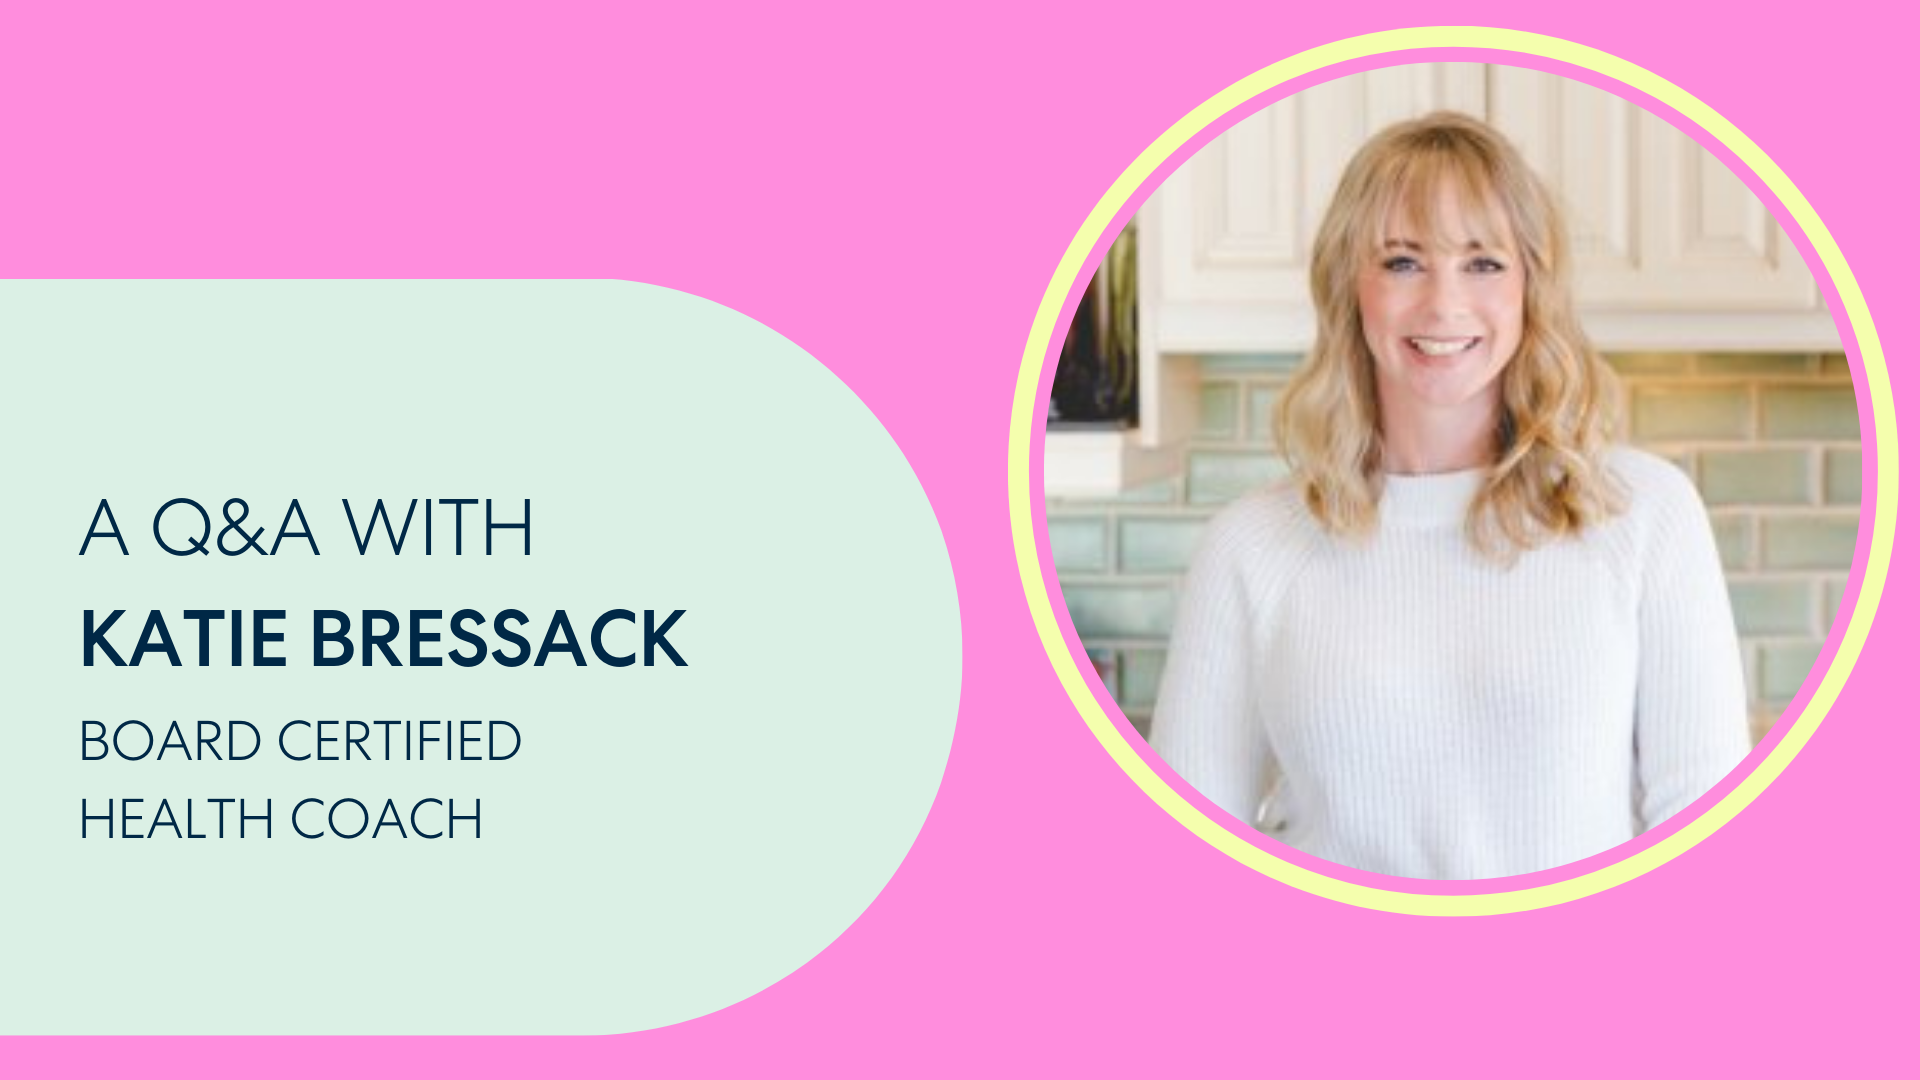 Finding Balance and Trusting Your Body: A Q&A With Katie Bressack